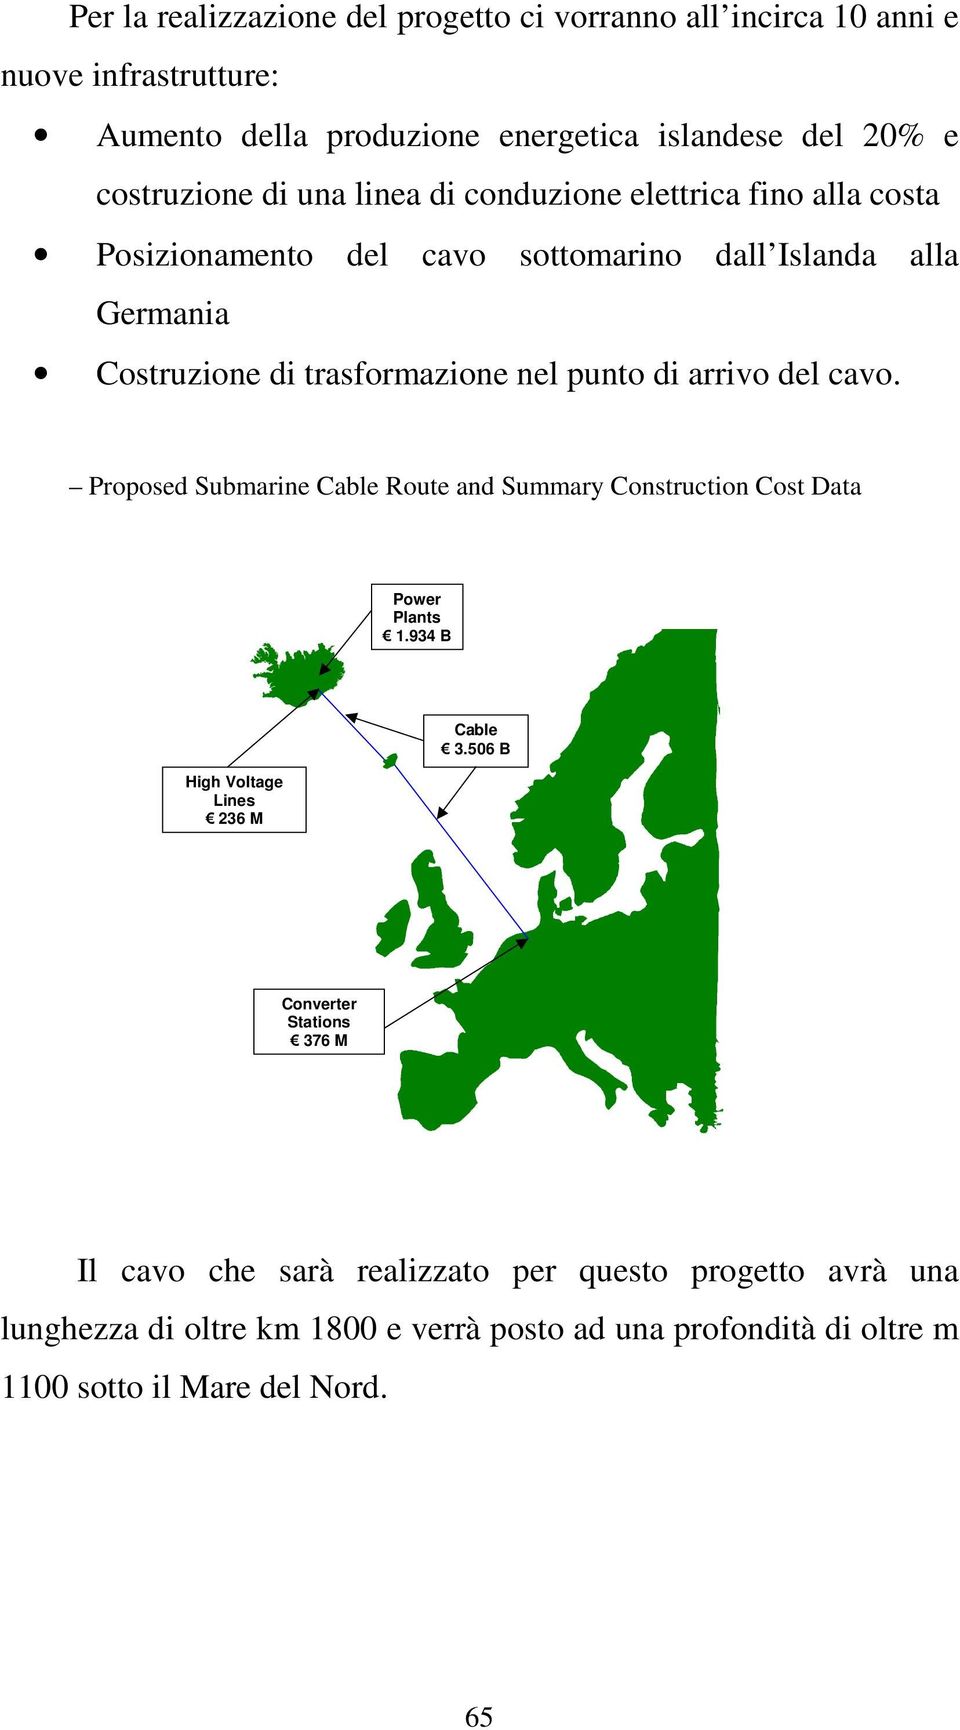 arrivo del cavo. Proposed Submarine Cable Route and Summary Construction Cost Data Power Plants 1.934 B High Voltage Lines 236 M Cable 3.